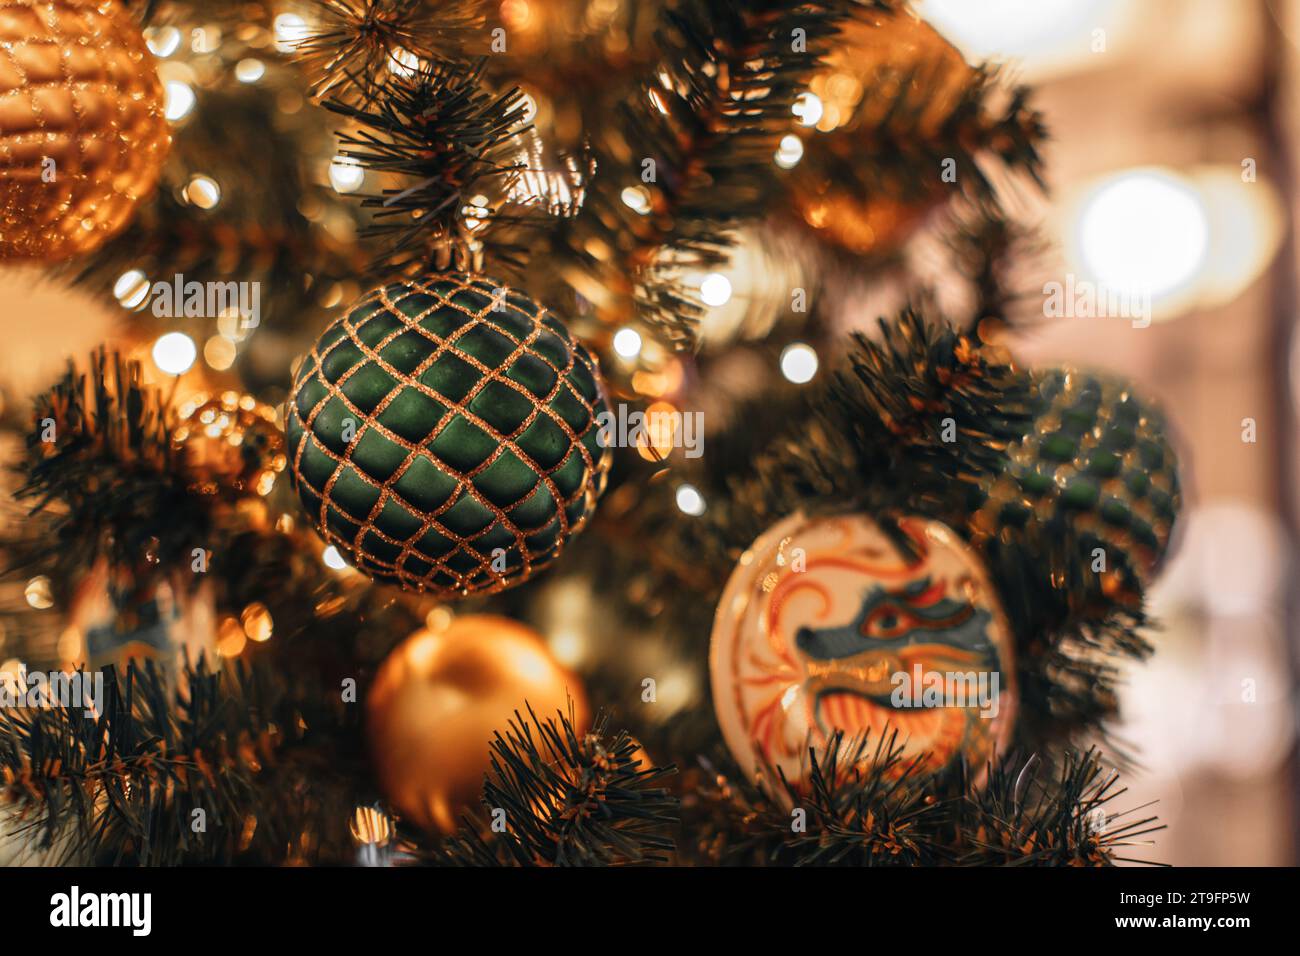 Festive golden green shiny Christmas ball with a dragon pattern hanging on a Christmas tree with garland lights. Decorated spruce branches Stock Photo